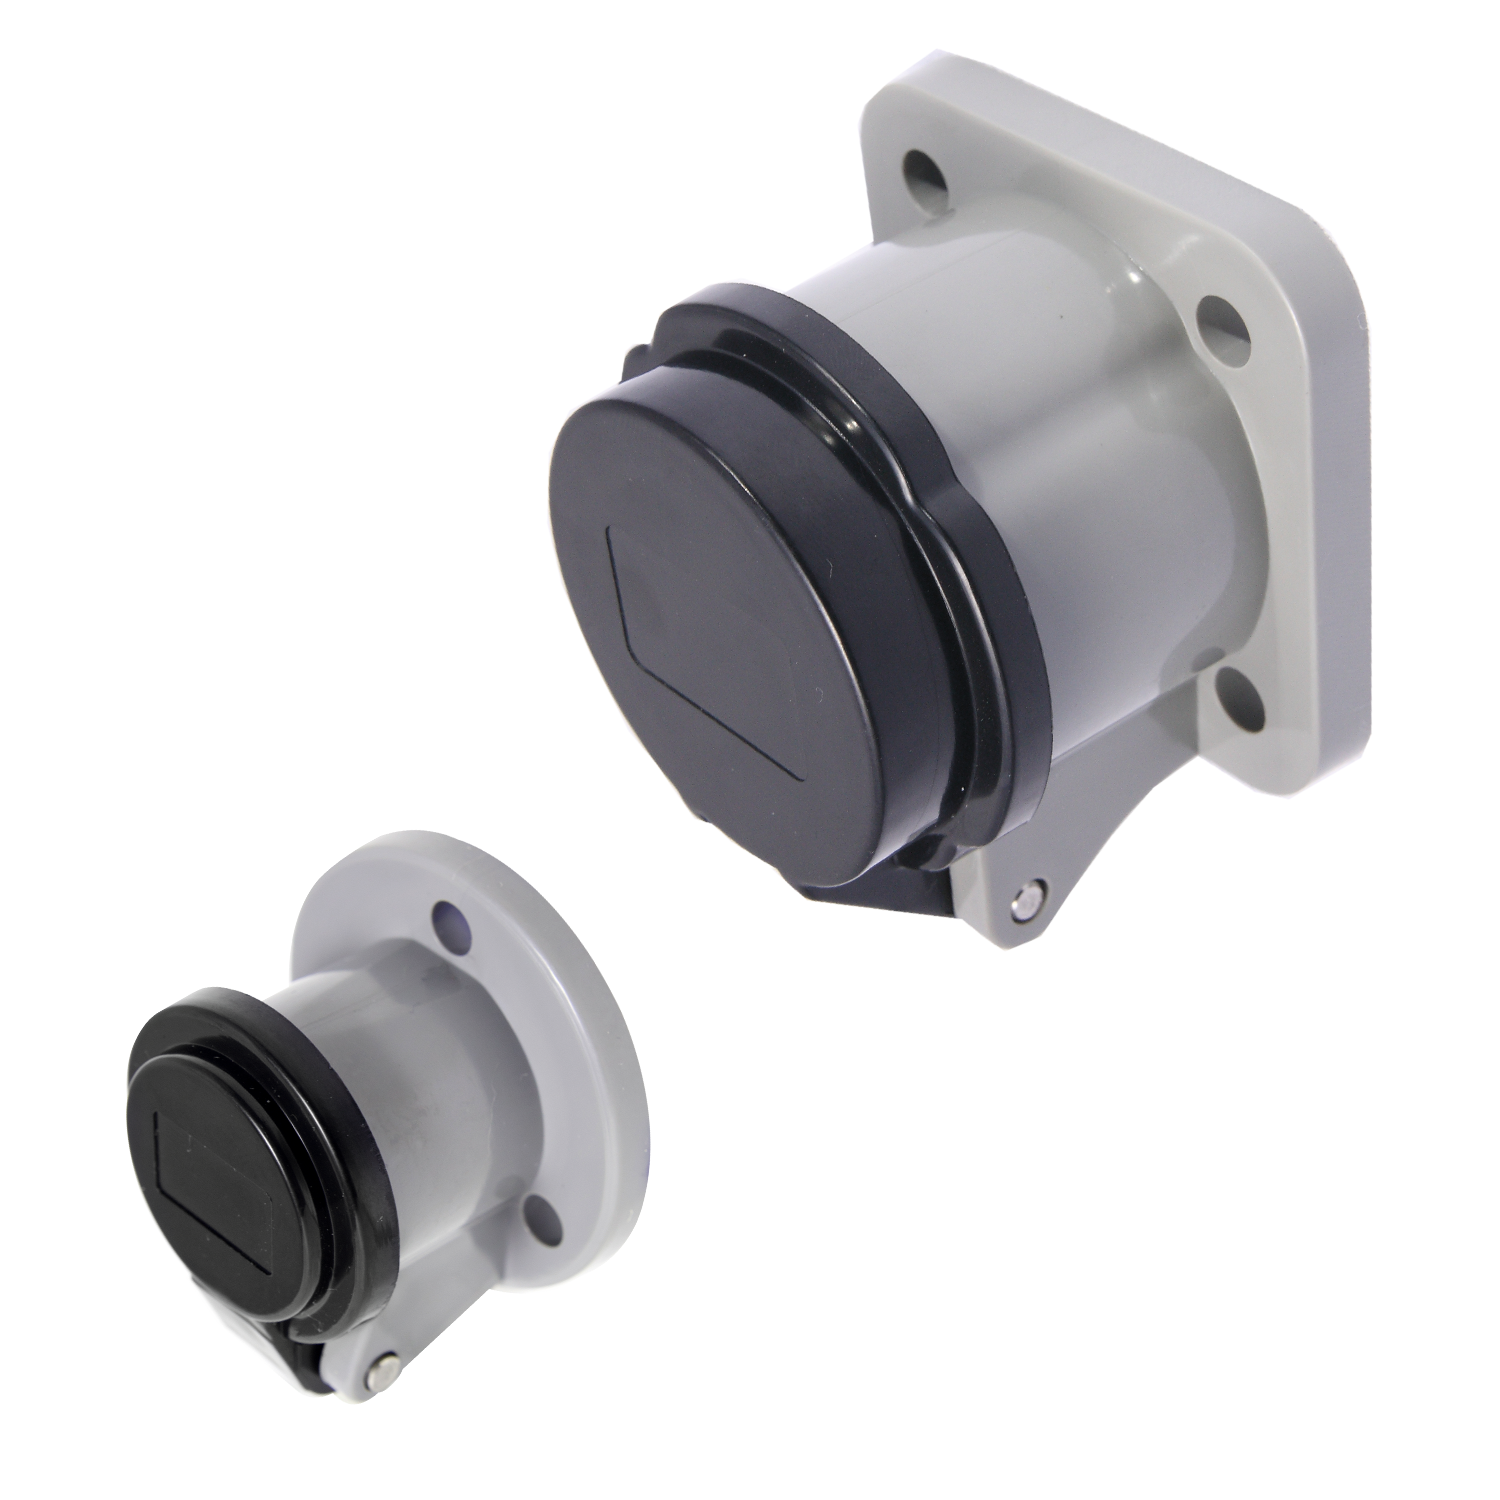 K-Lok Single Pole Connectors - Connection Products - Products